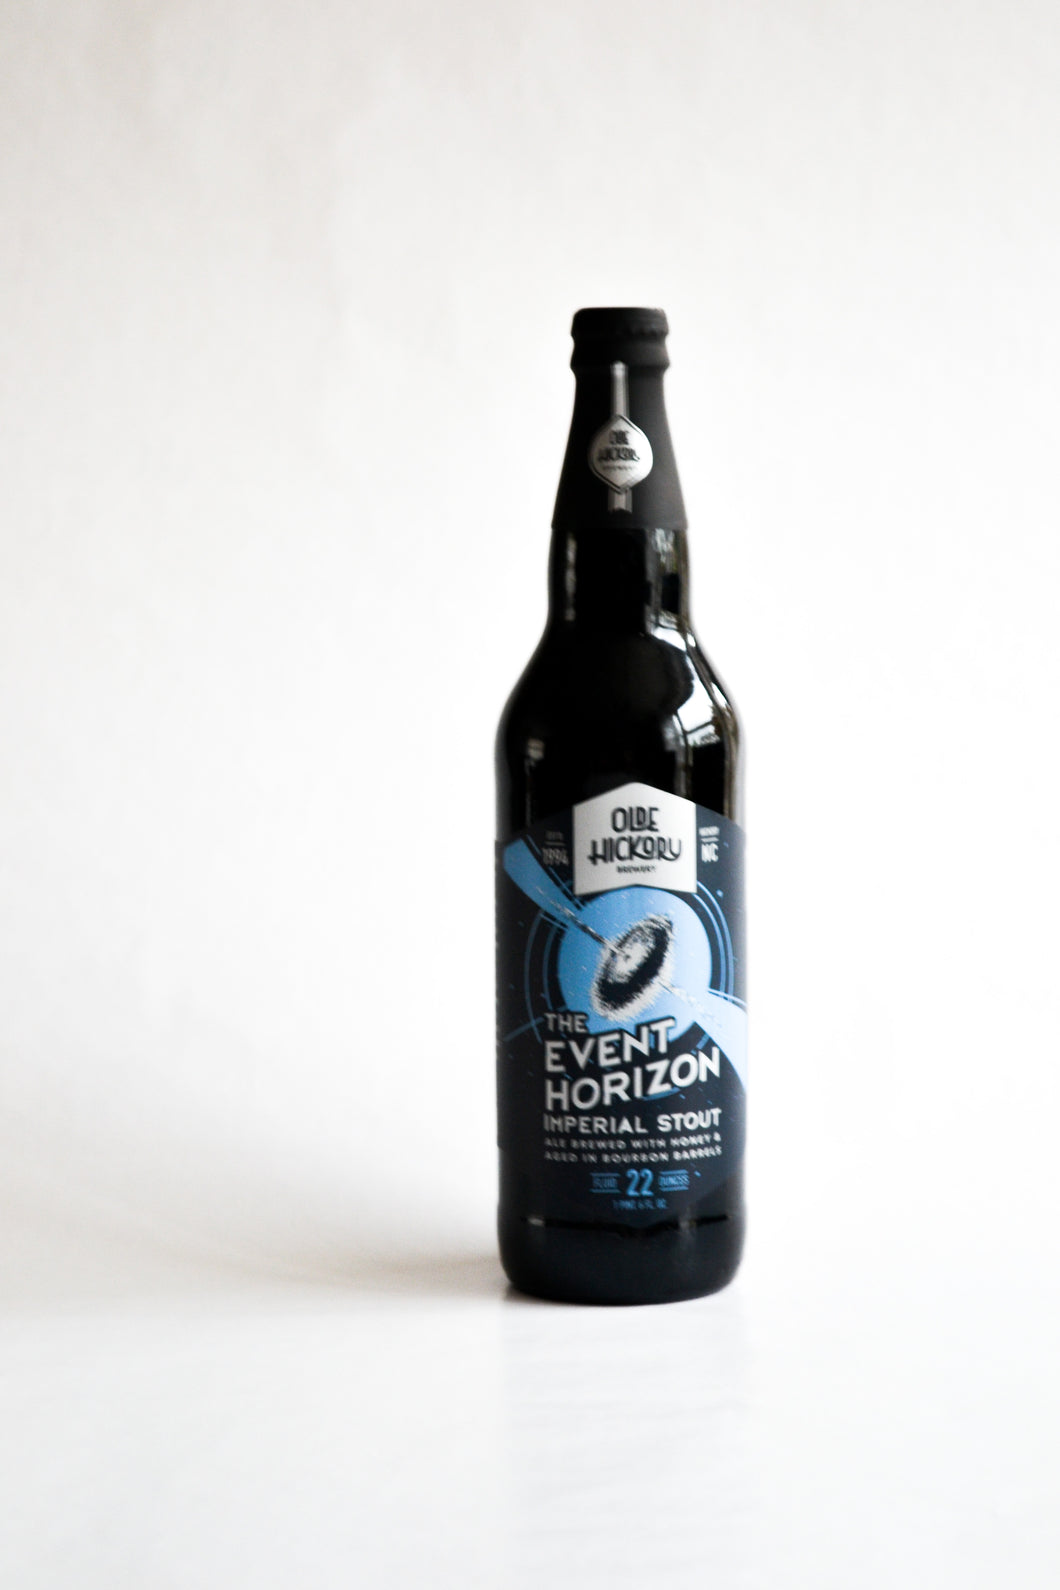 Olde Hickory Brewery - The Event Horizon